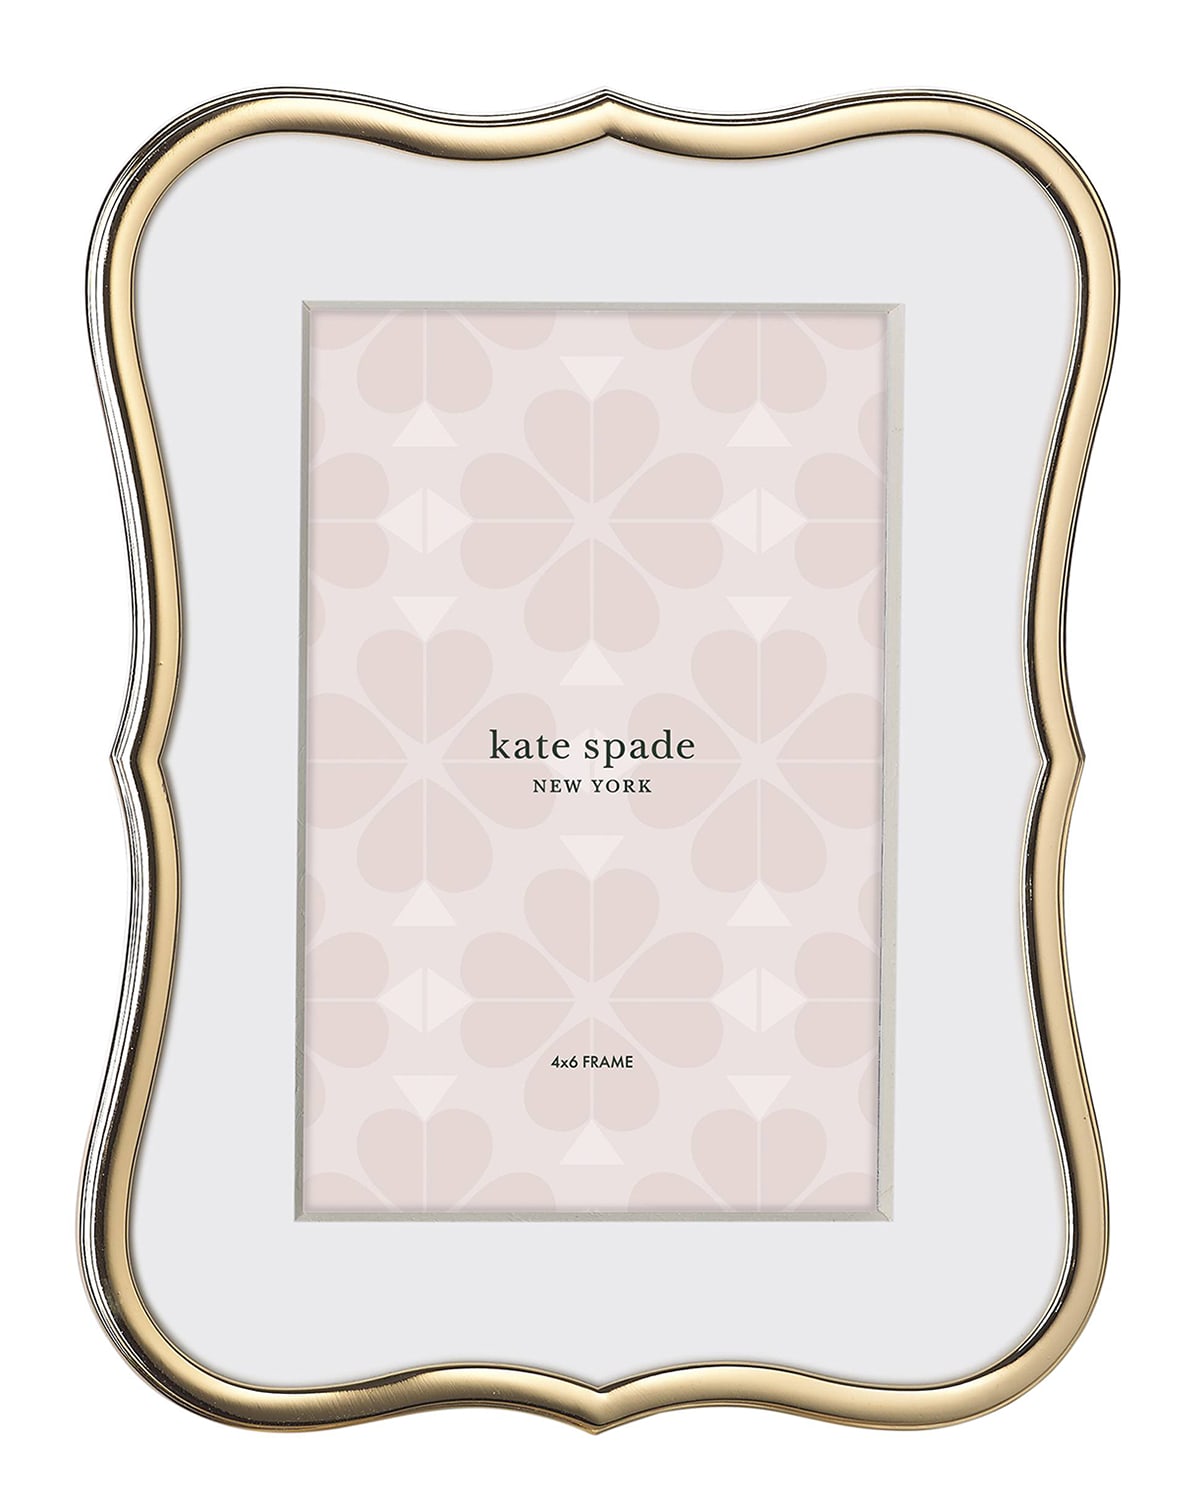 Image kate spade new york crown point 4" x 6" picture frame